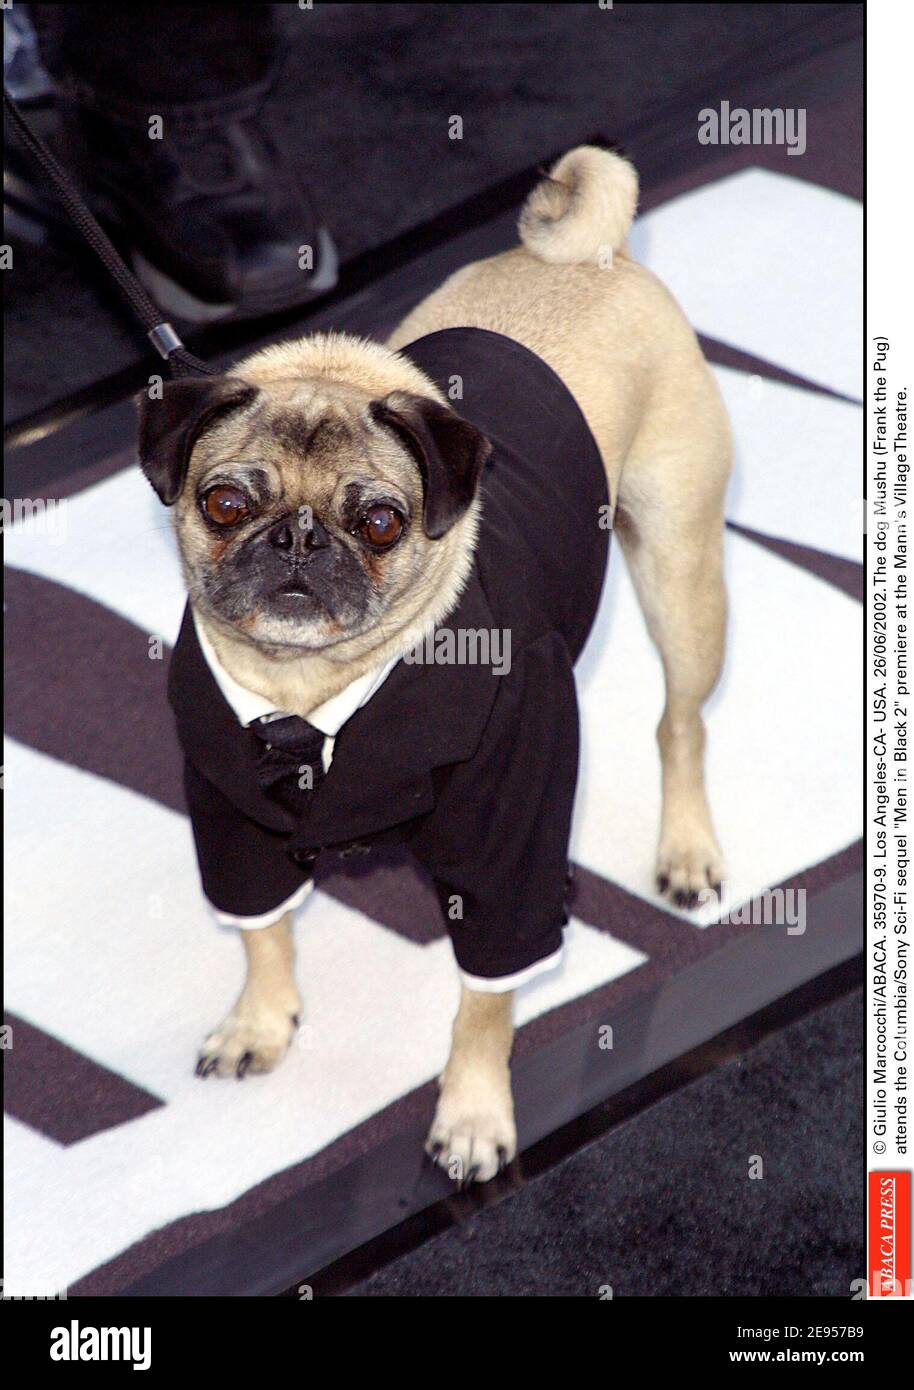 Giulio Marcocchi/ABACA. 35970-9. Los Angeles-CA- USA. 26/06/2002. The dog  Mushu (Frank the Pug) attends the Columbia/Sony Sci-Fi sequel Men in Black  2 premiere at the Mann's Village Theatre Stock Photo -